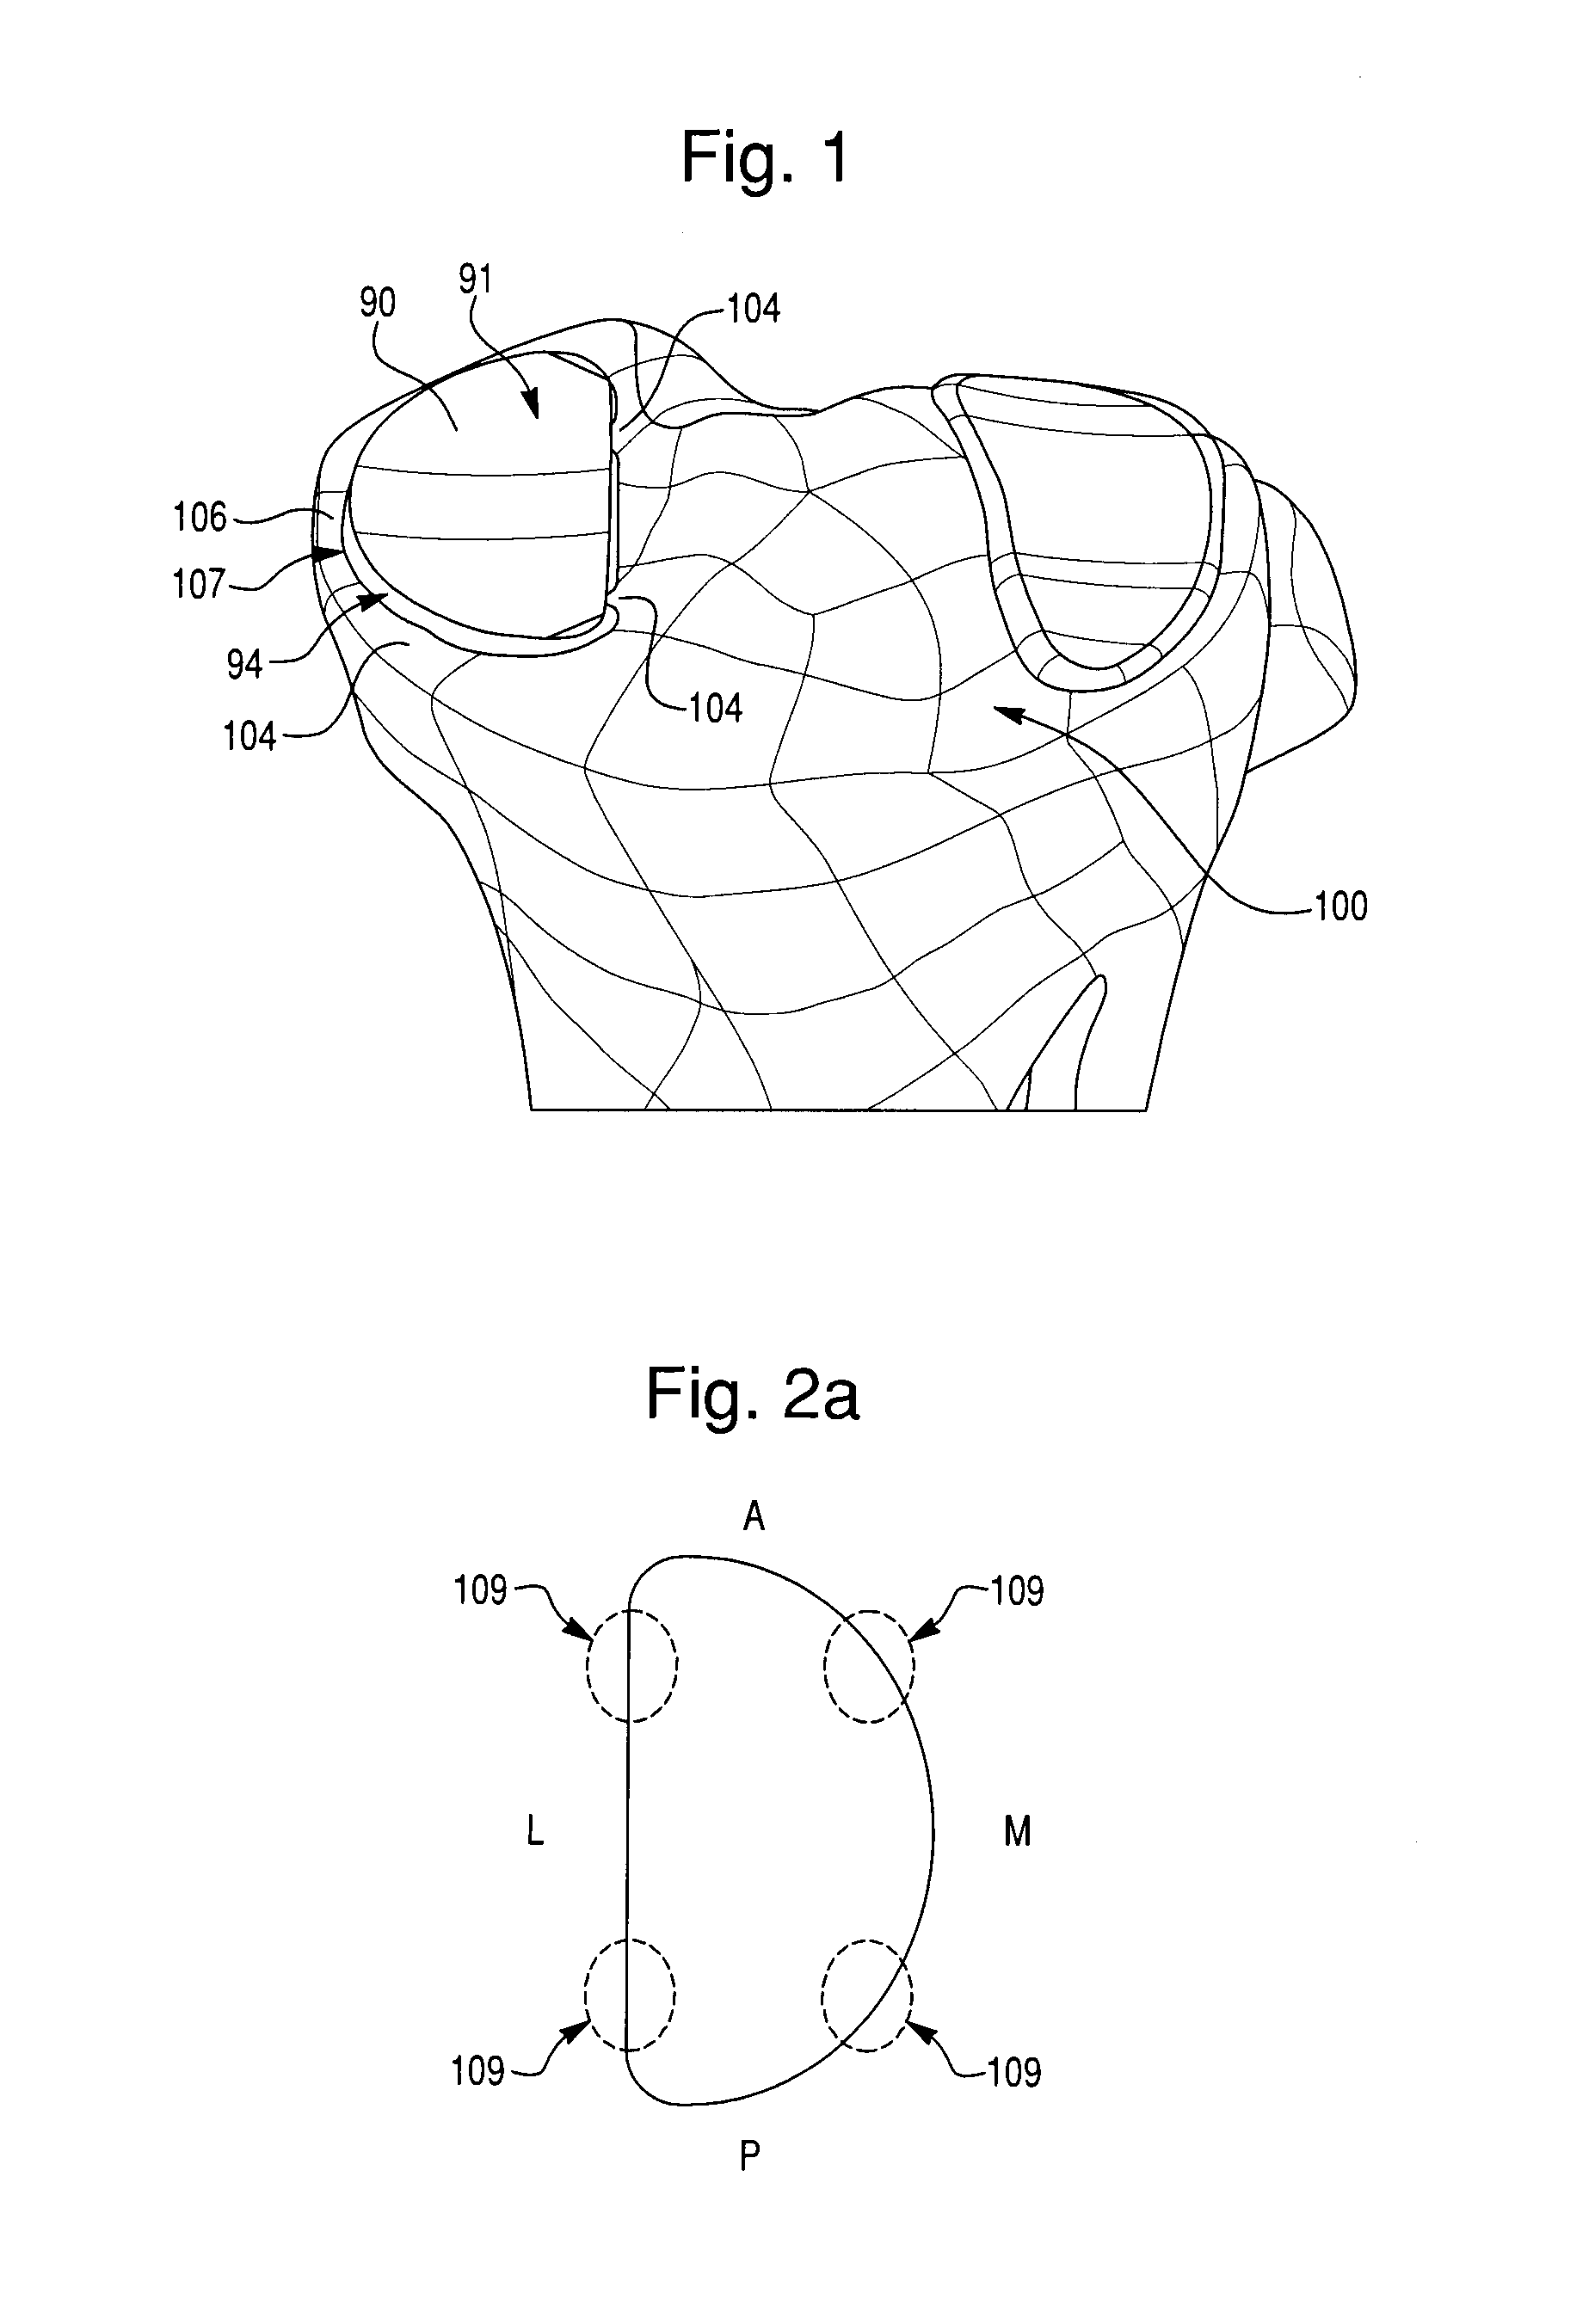 Prosthetic device, method of planning bone removal for implantation of prosthetic device, and robotic system